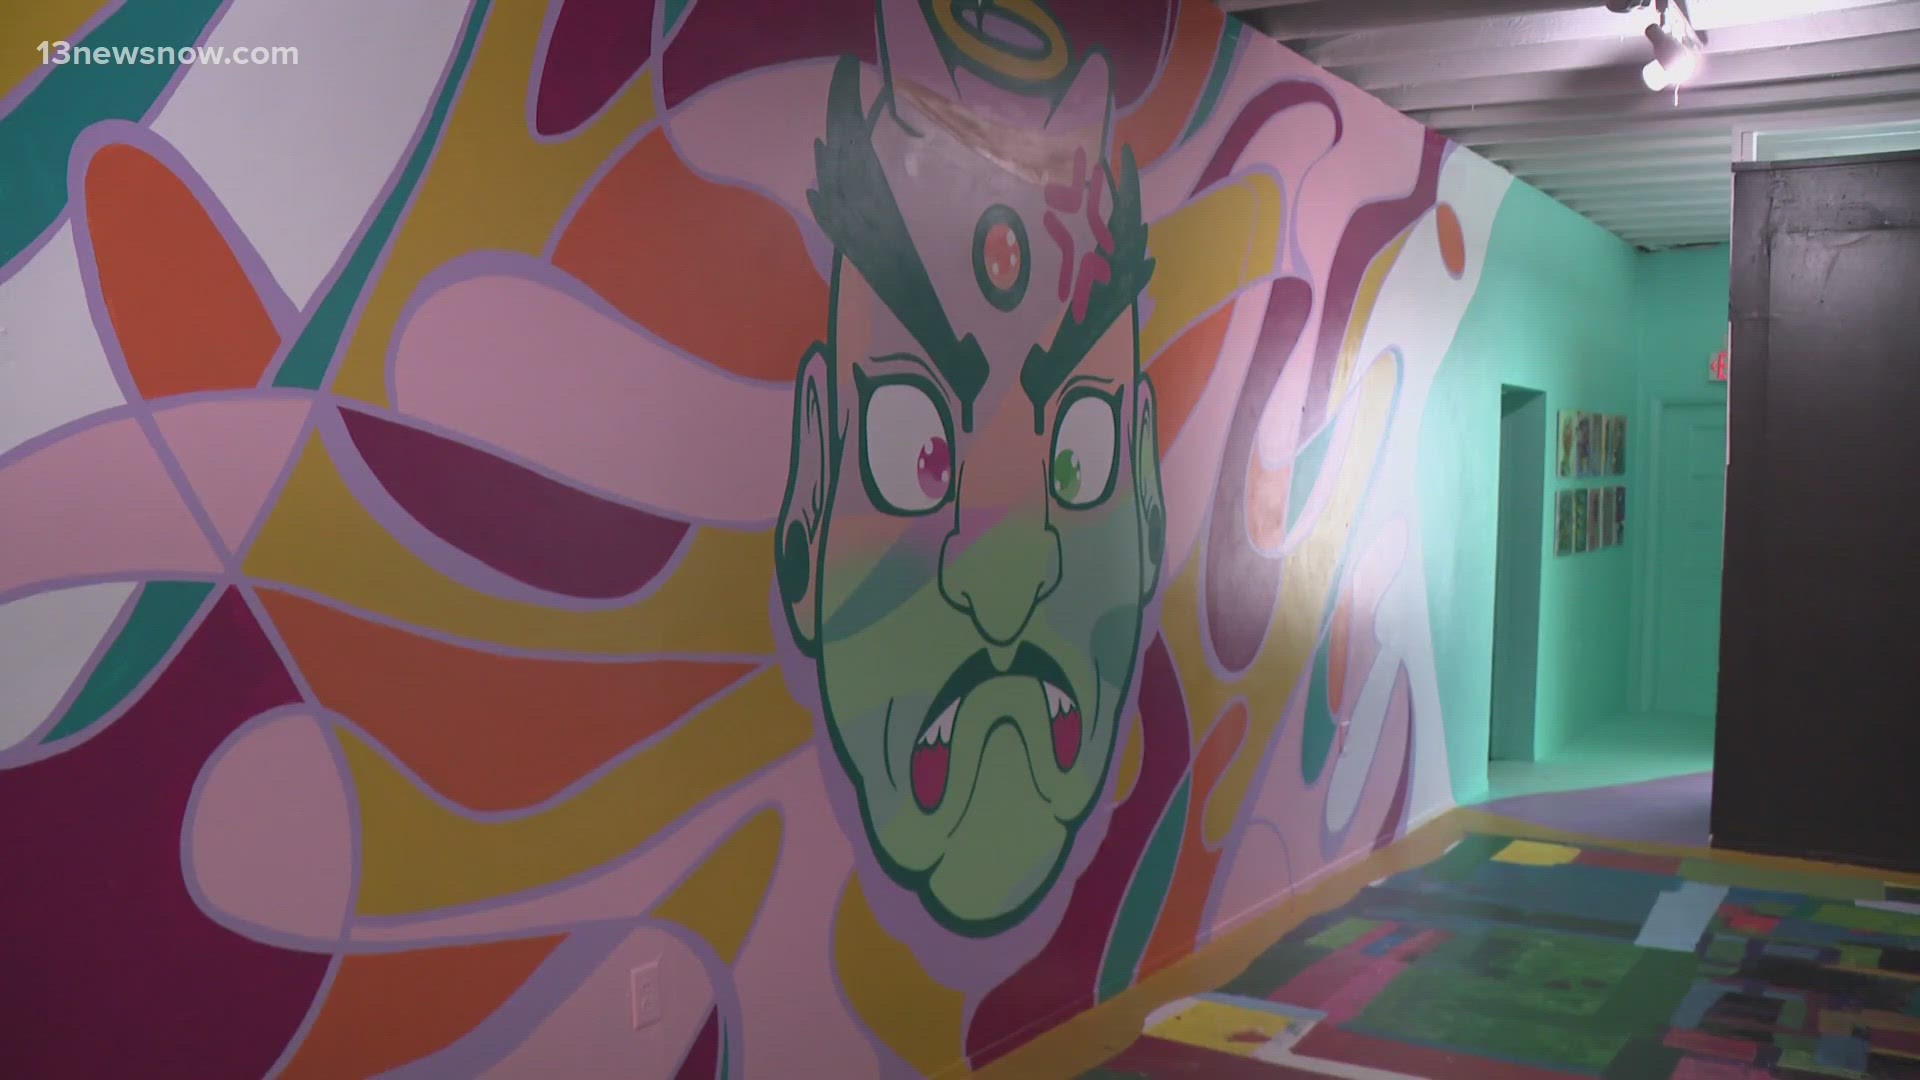 Local and National artists are working to bring pops of color and creativity to buildings and underpasses all over Newport News.